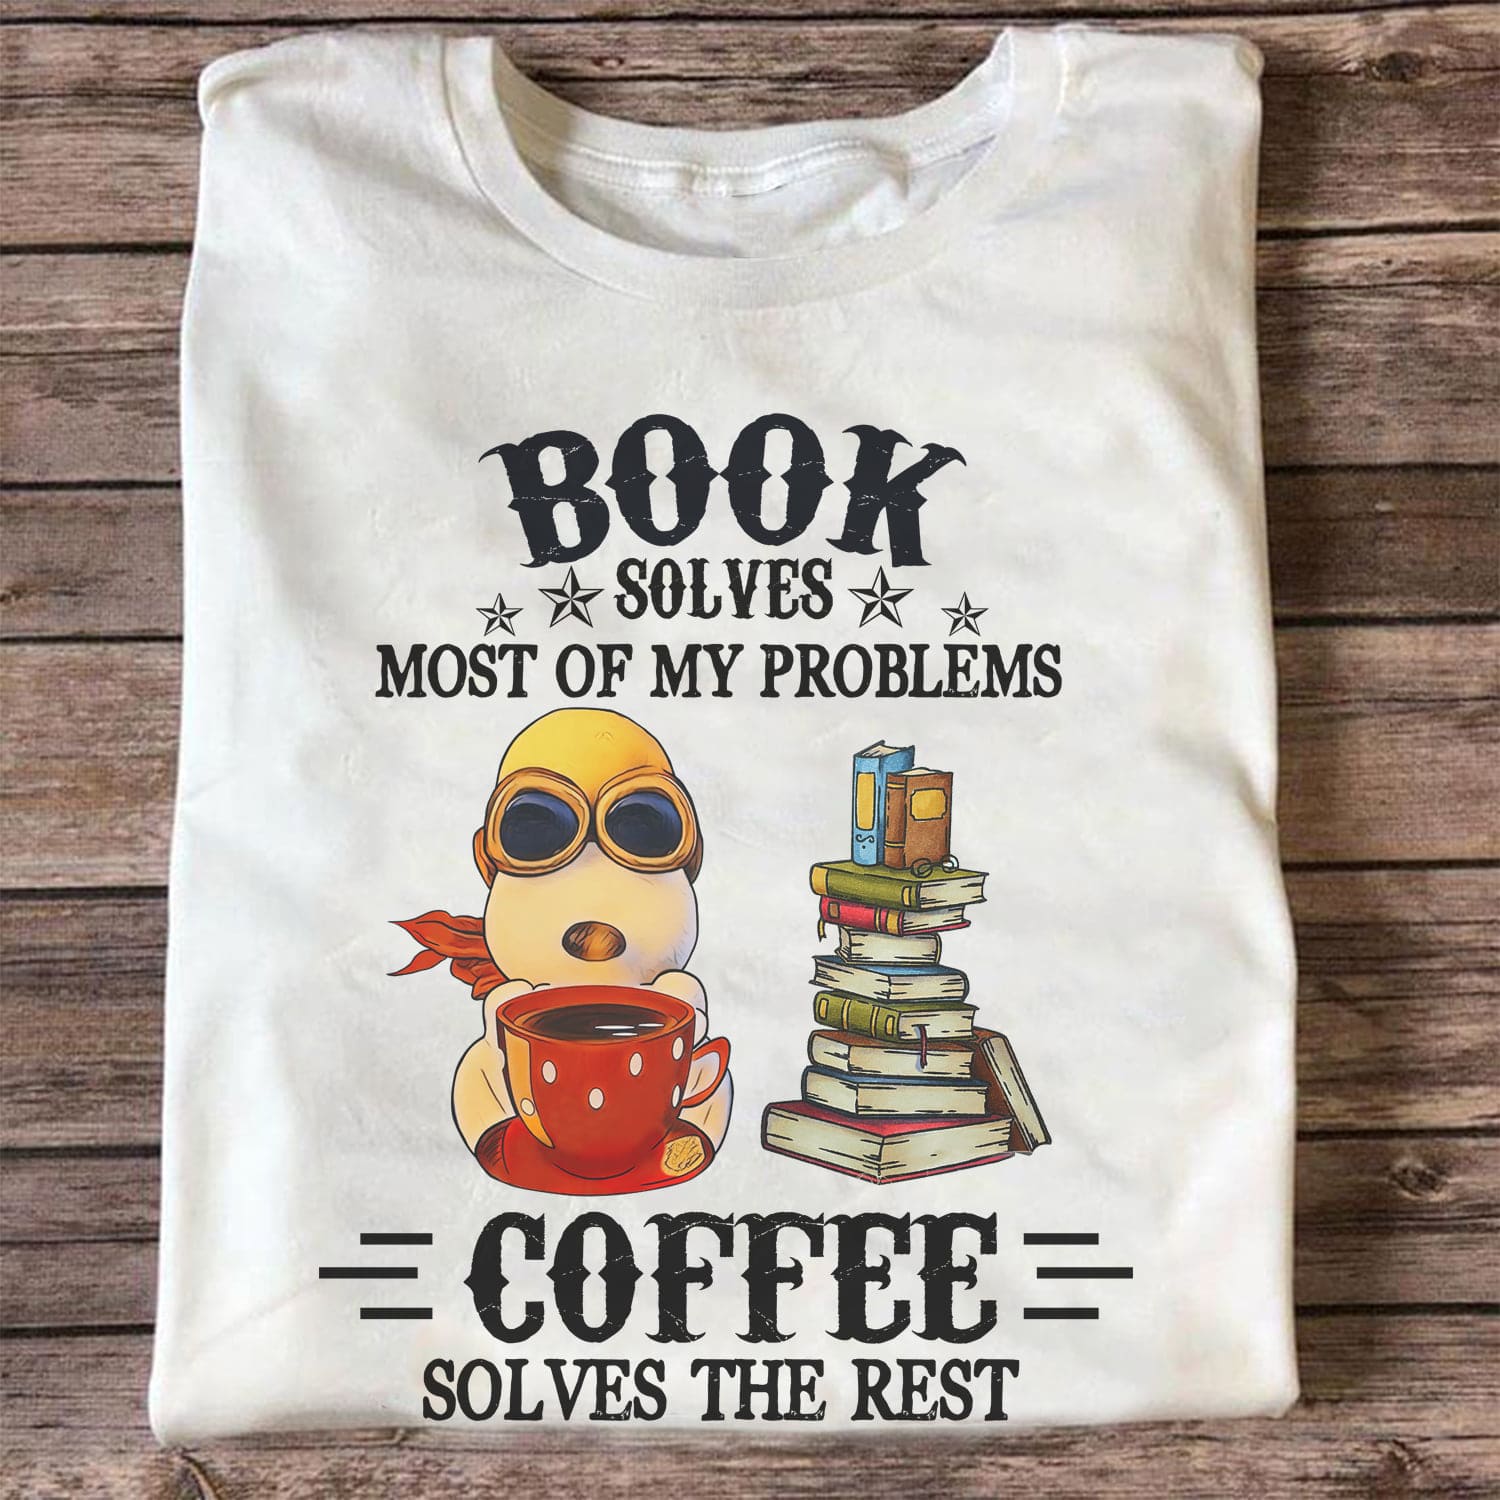 Book solves most of my problems, coffee solves the rest - Coffee and dogs, reading book hobby